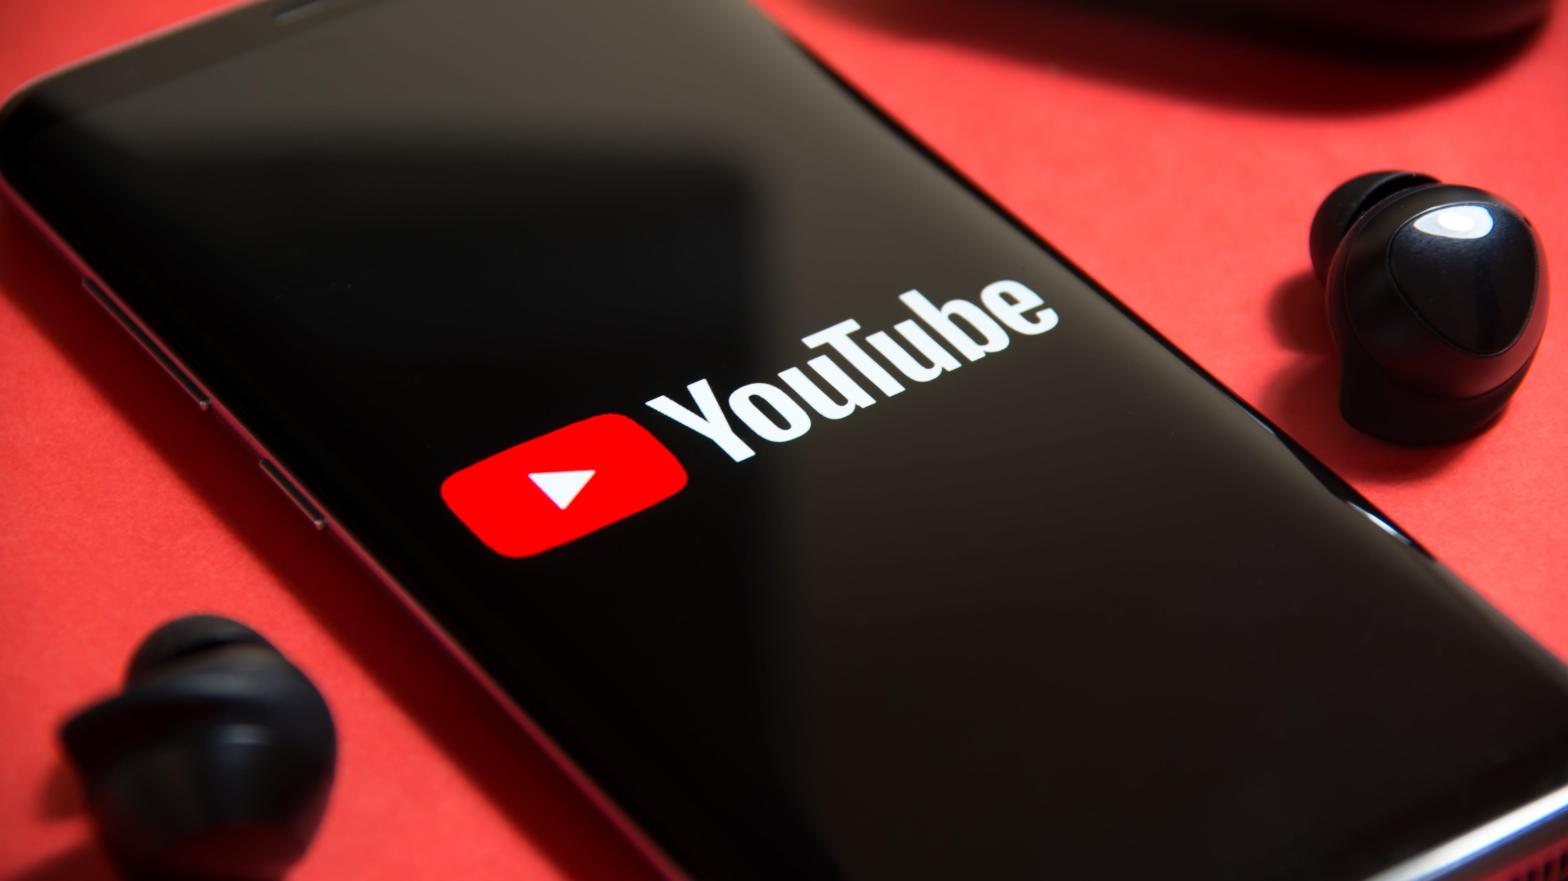 YouTube released Stories to 10,000 channels in November 2018. (Image: Chubo - my masterpiece, Shutterstock)